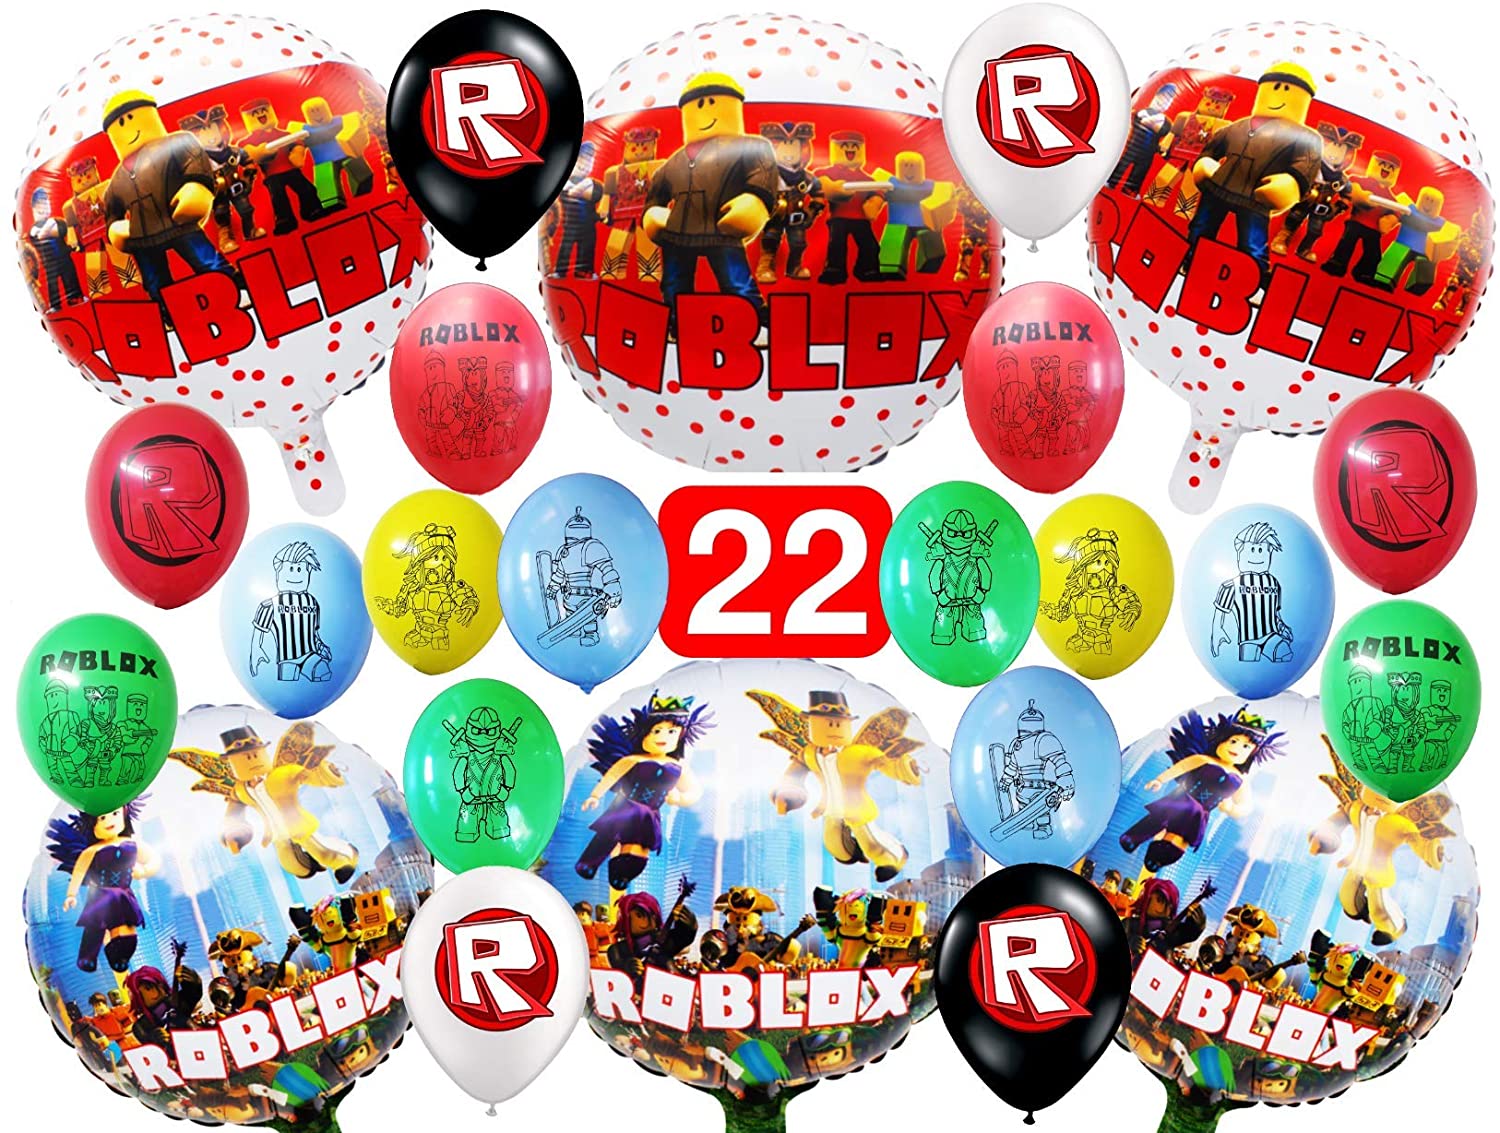 Latex Balloons For Birthday Party Theme Decoration Supplies Cheap Birthday Party Supplies Cheap Birthday Party Supplies For Kids From Yseller17 60 3 Dhgate Com - roblox balloons uk